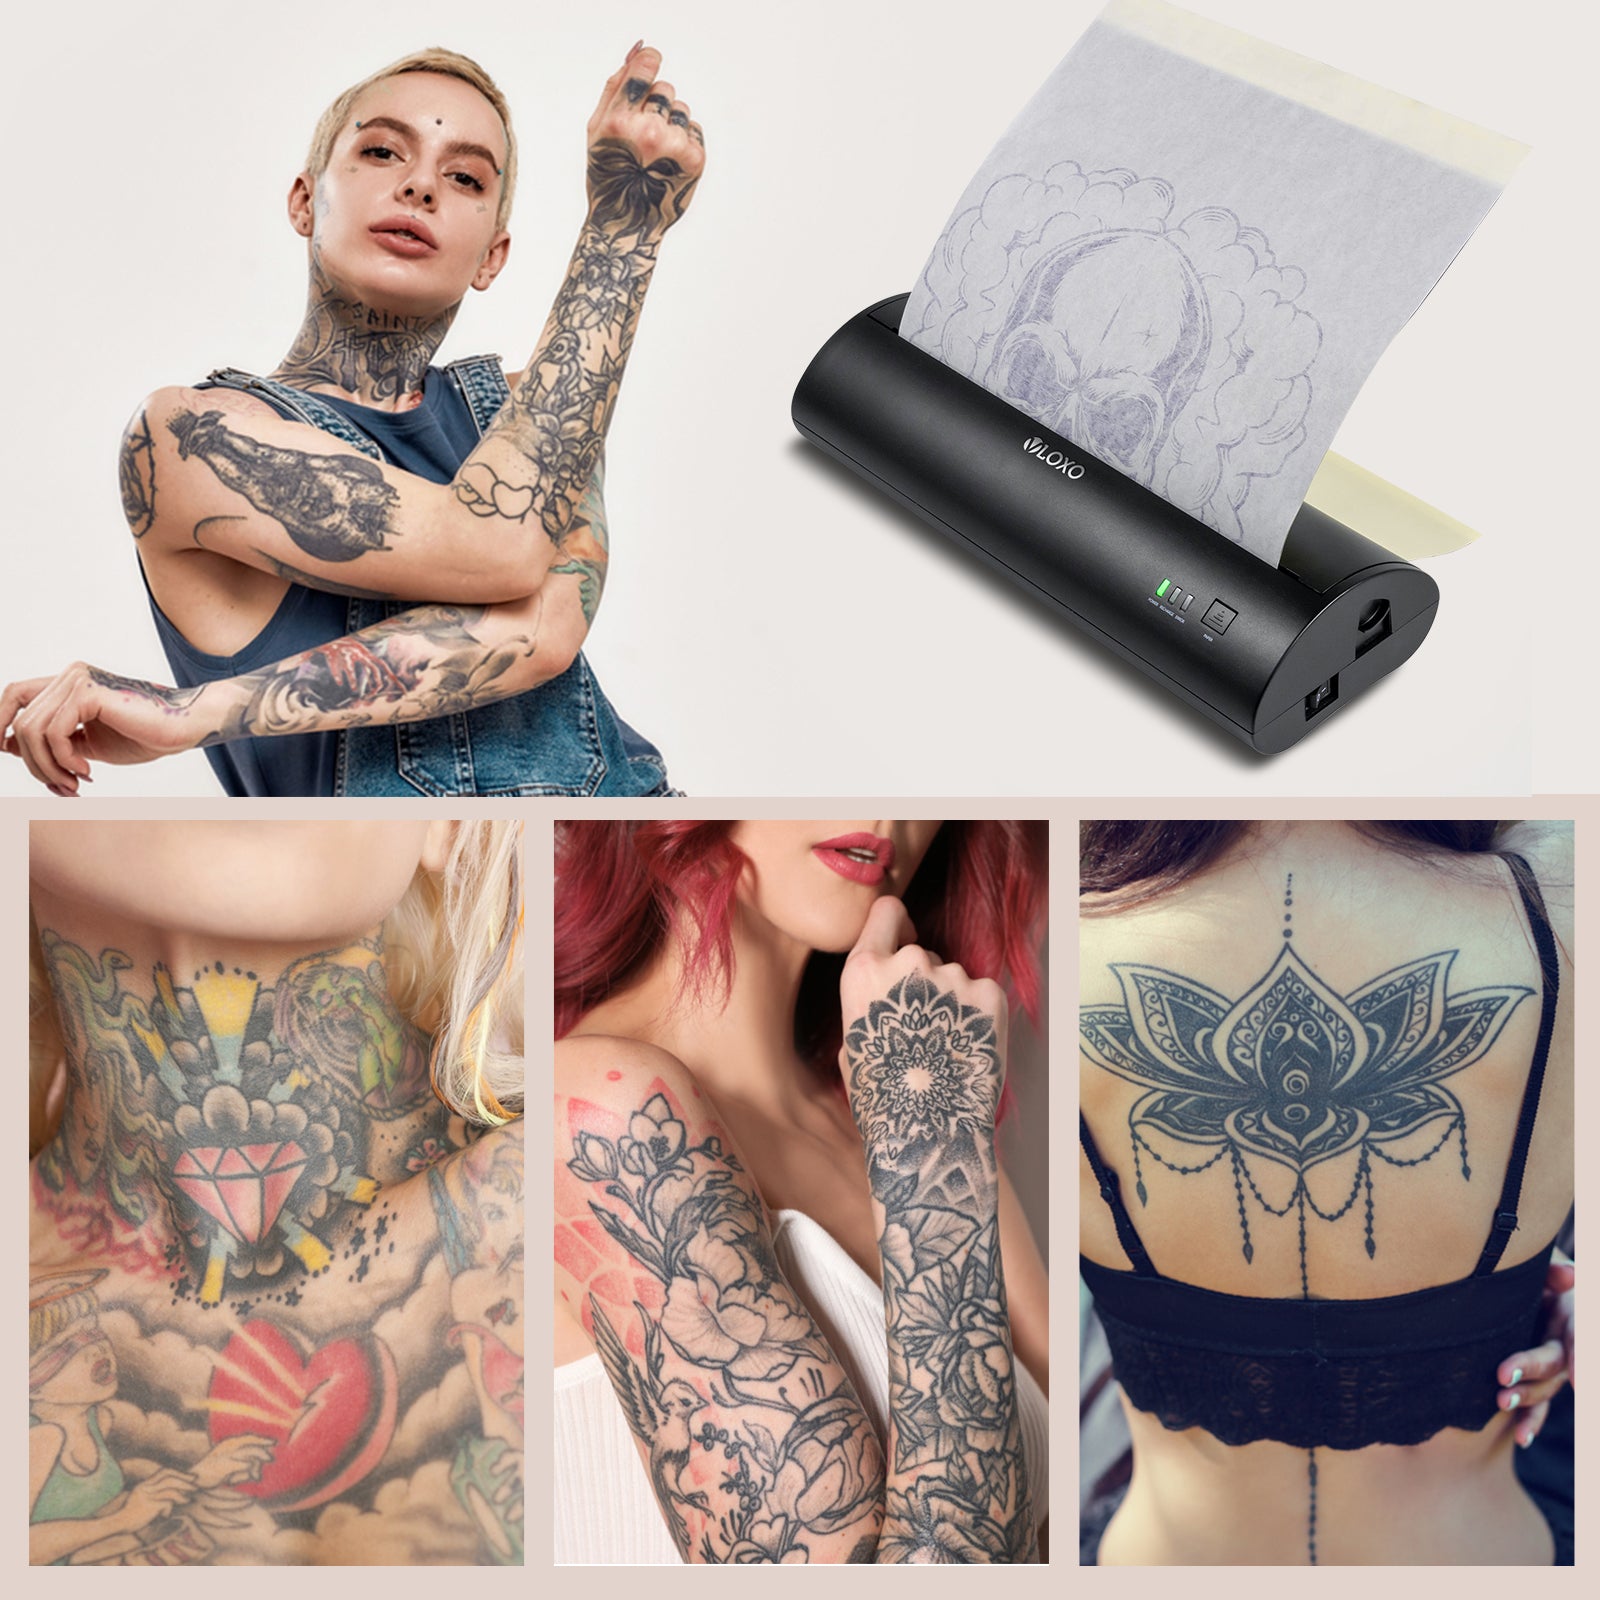 Thermal Tattoo Printer With Stencil Portable Printer For Laptop